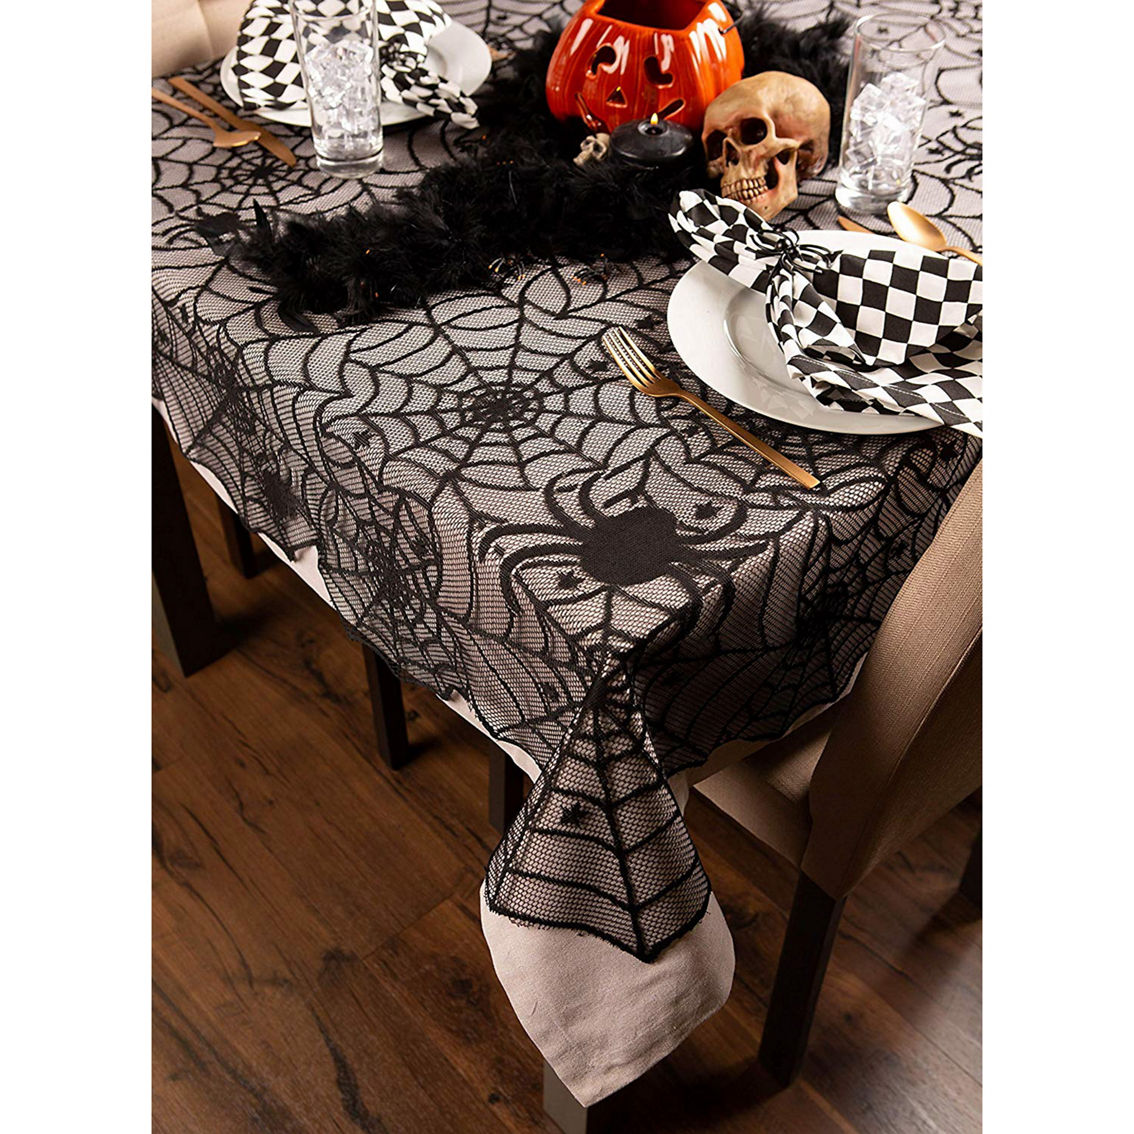 Design Imports 54 in. x 72 in. Halloween Lace Tablecloth - Image 3 of 9